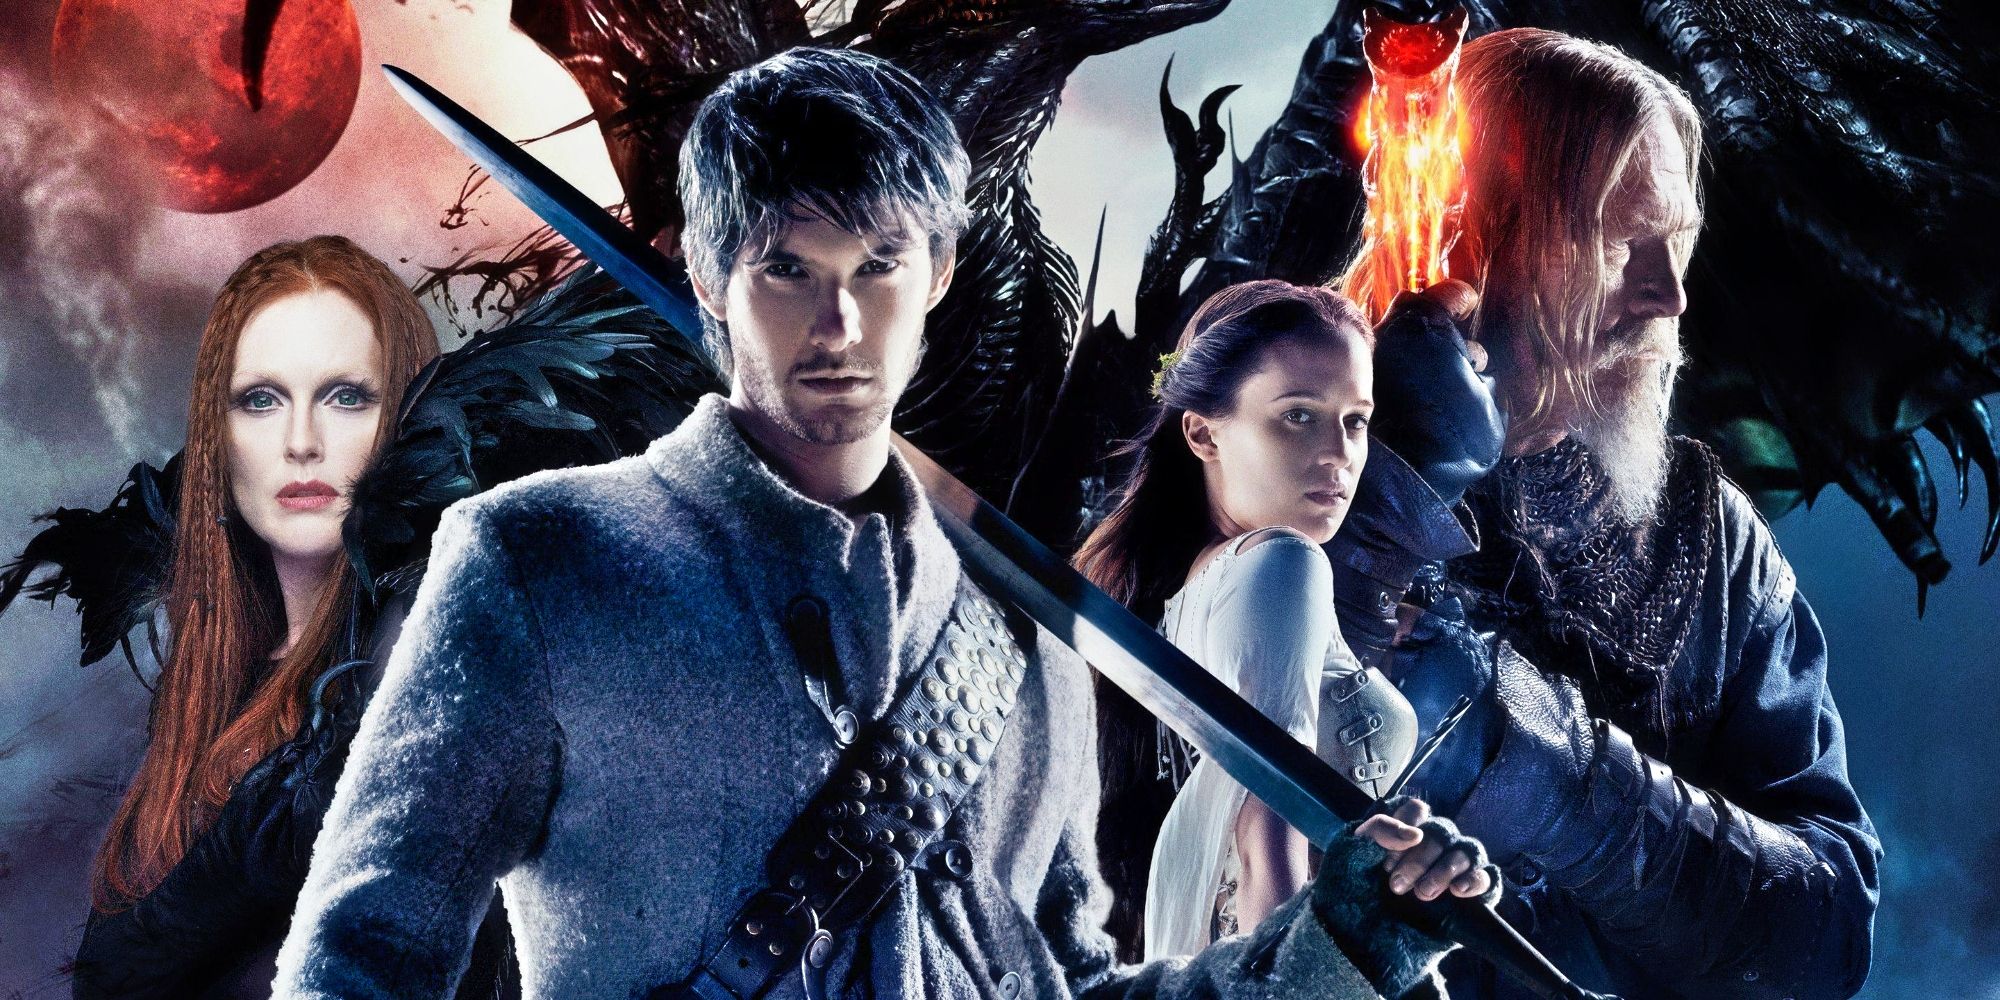 seventh son poster